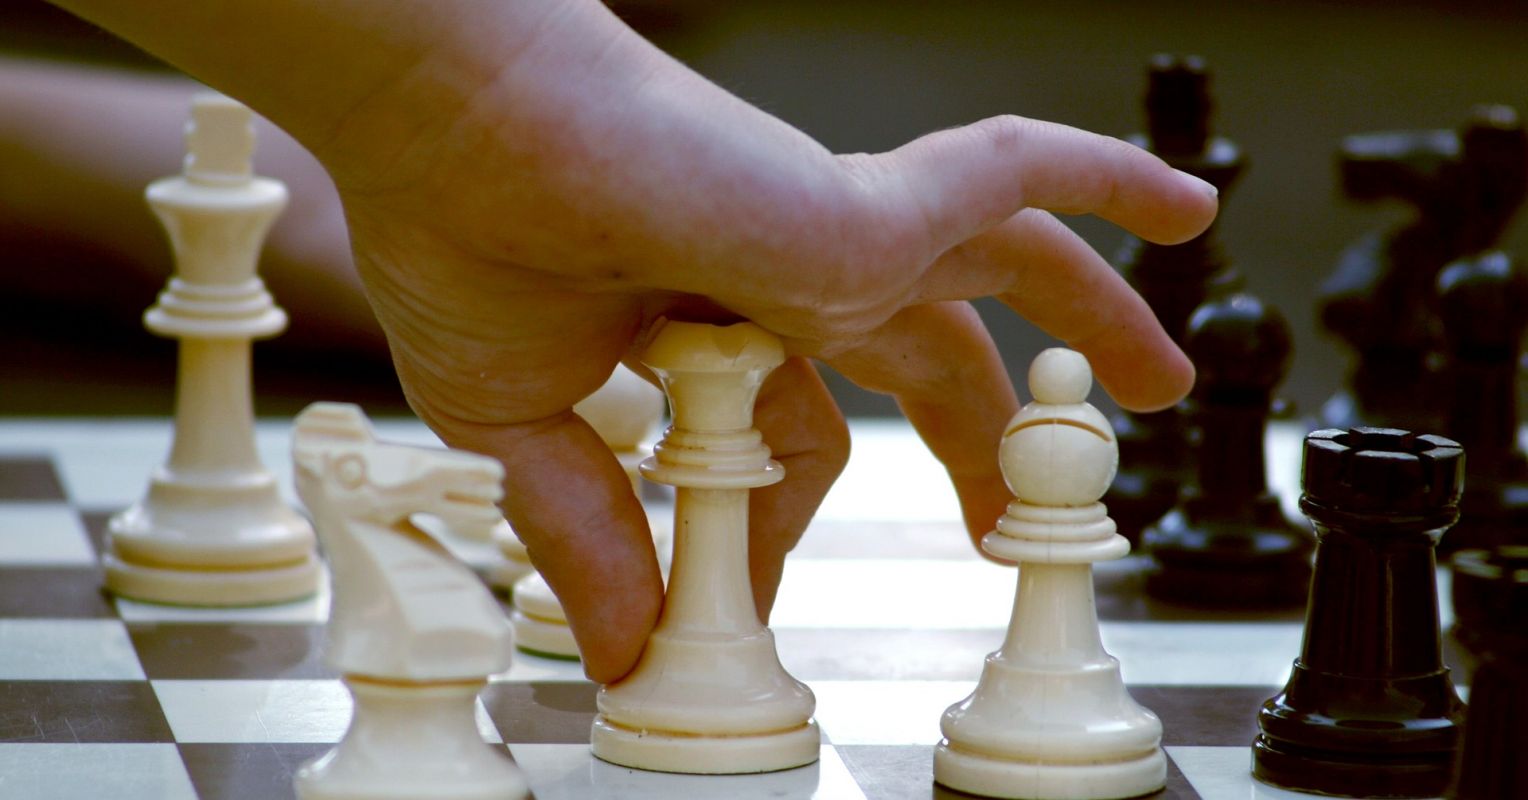 Articles Archive » All Chess Posts » Chess Intellect